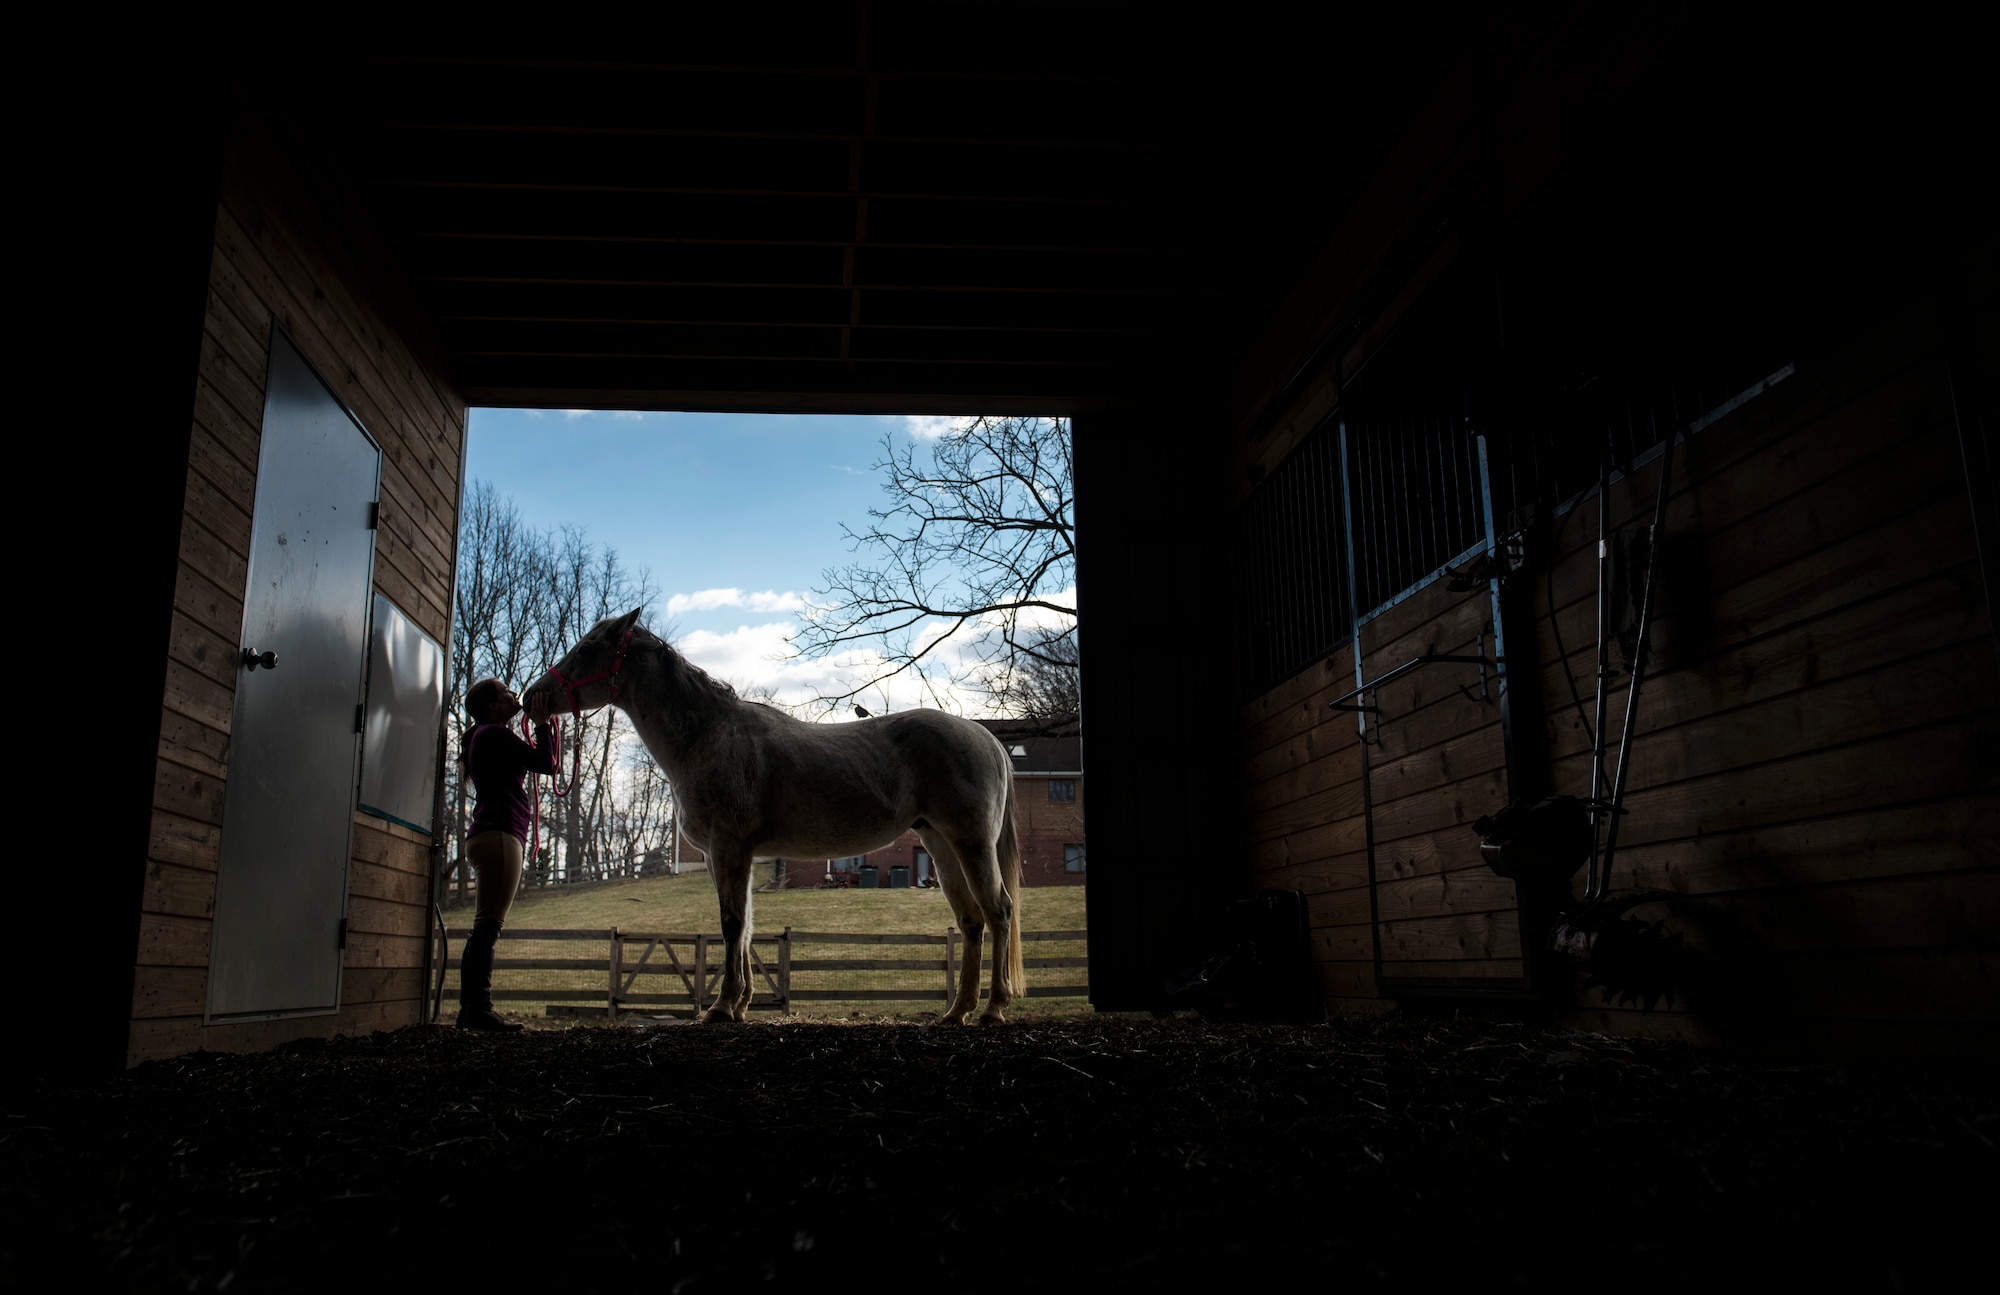 Airman 1st Class Kaitlyn Evans spends time with her horse Kobalt after the duty day. Evans, an 11th Security Forces Squadron patrolman at Andrews Air Force Base, Maryland, relocated Kobalt to Maryland at her own expense to participate in horse competitions. Spending time with Kobalt has helped Evans cope with the mental and physical adjustments of being an Airman. (U.S. Air Force photo/Staff Sgt. Vernon Young Jr.)